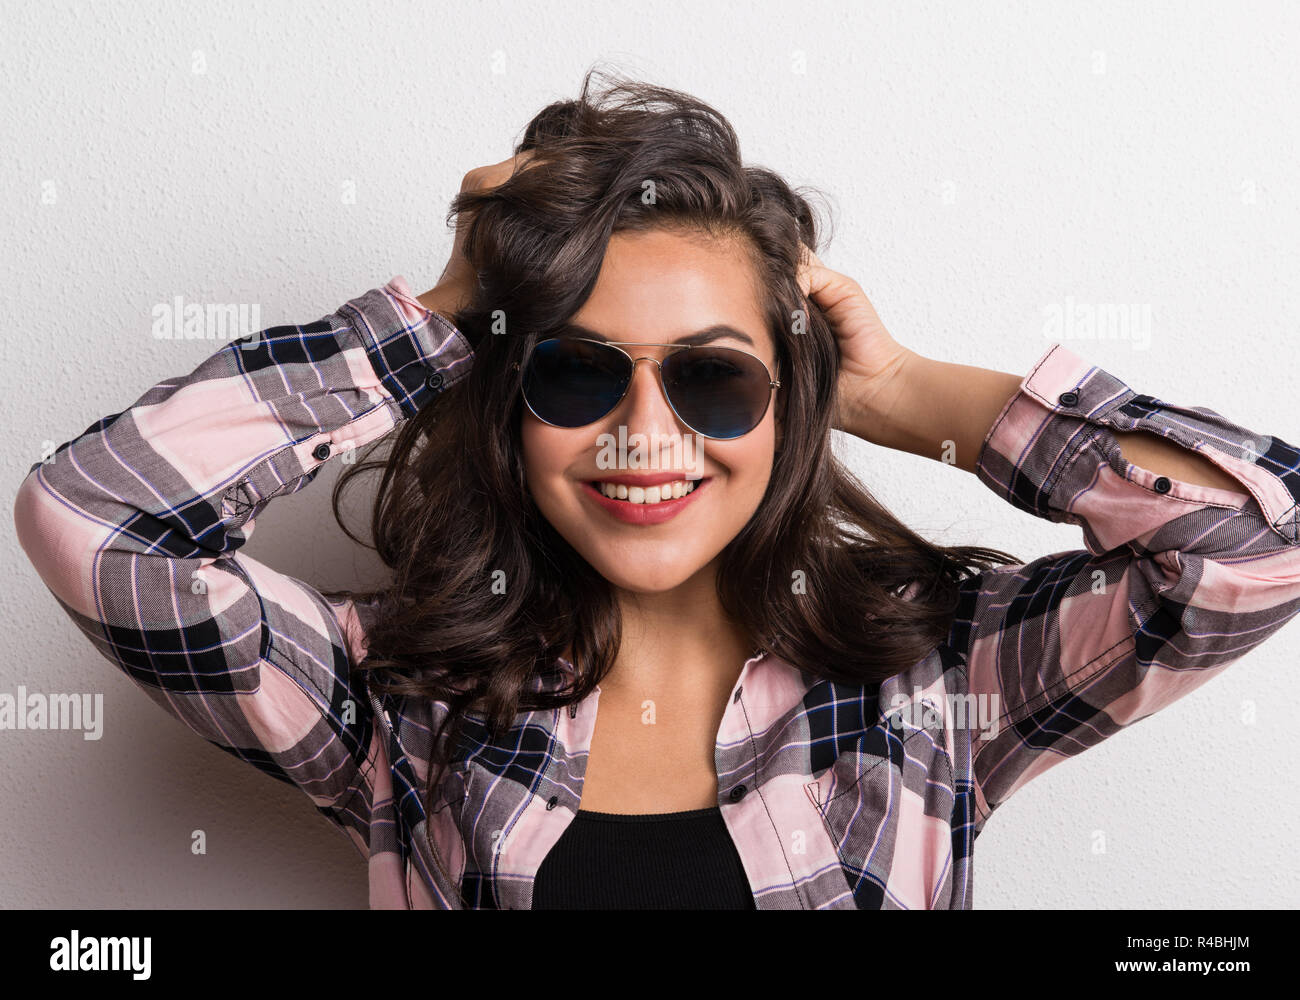 Young beautiful happy woman with sunglasses in studio. Stock Photo